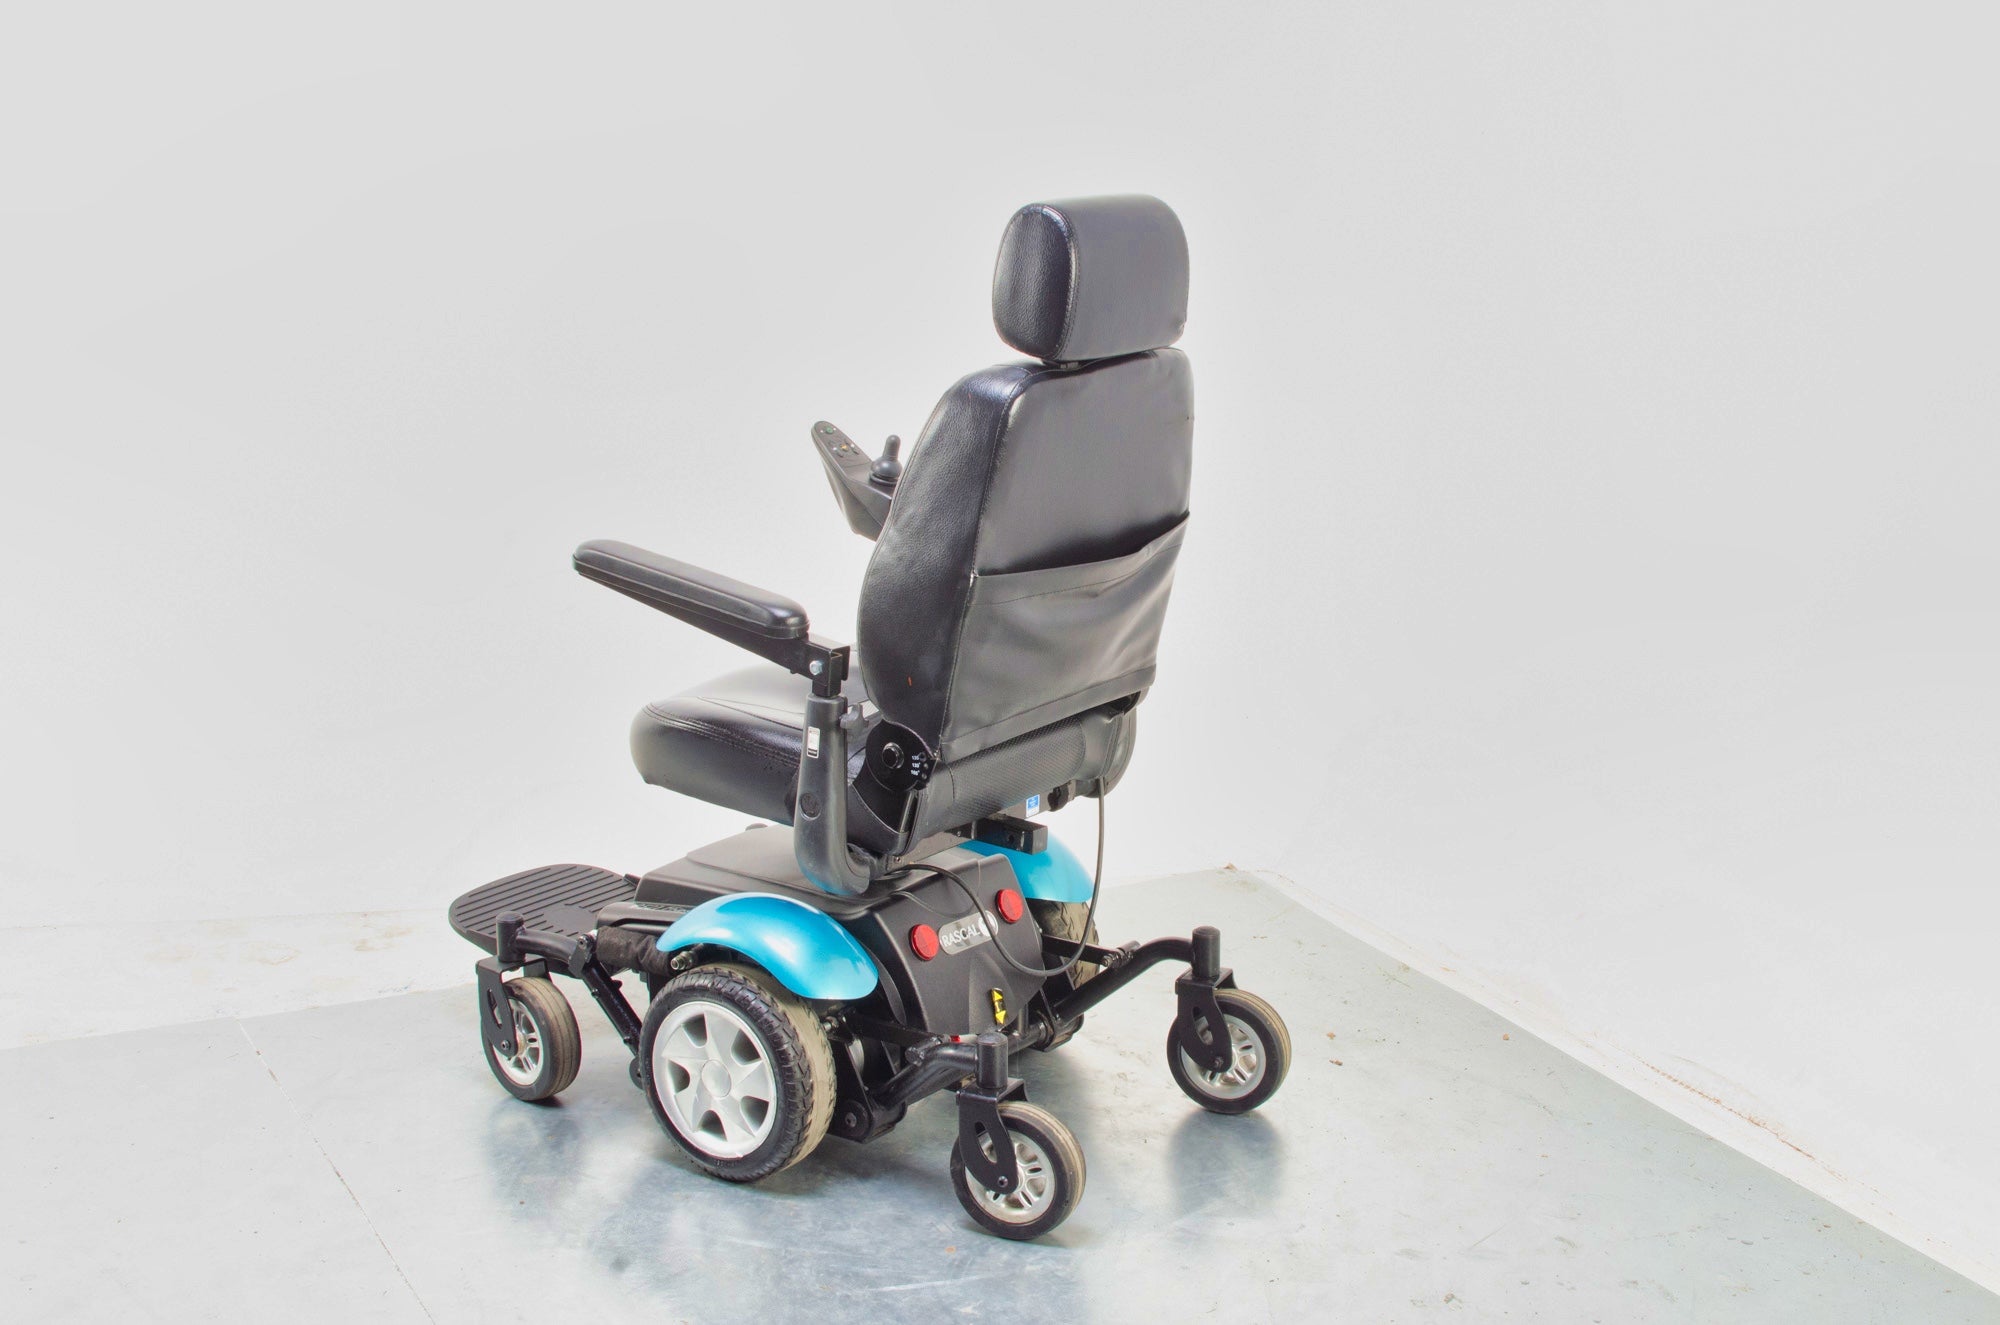 Rascal P327 Mini Electric Mobility Wheelchair Powerchair Indoor Outdoor Teal